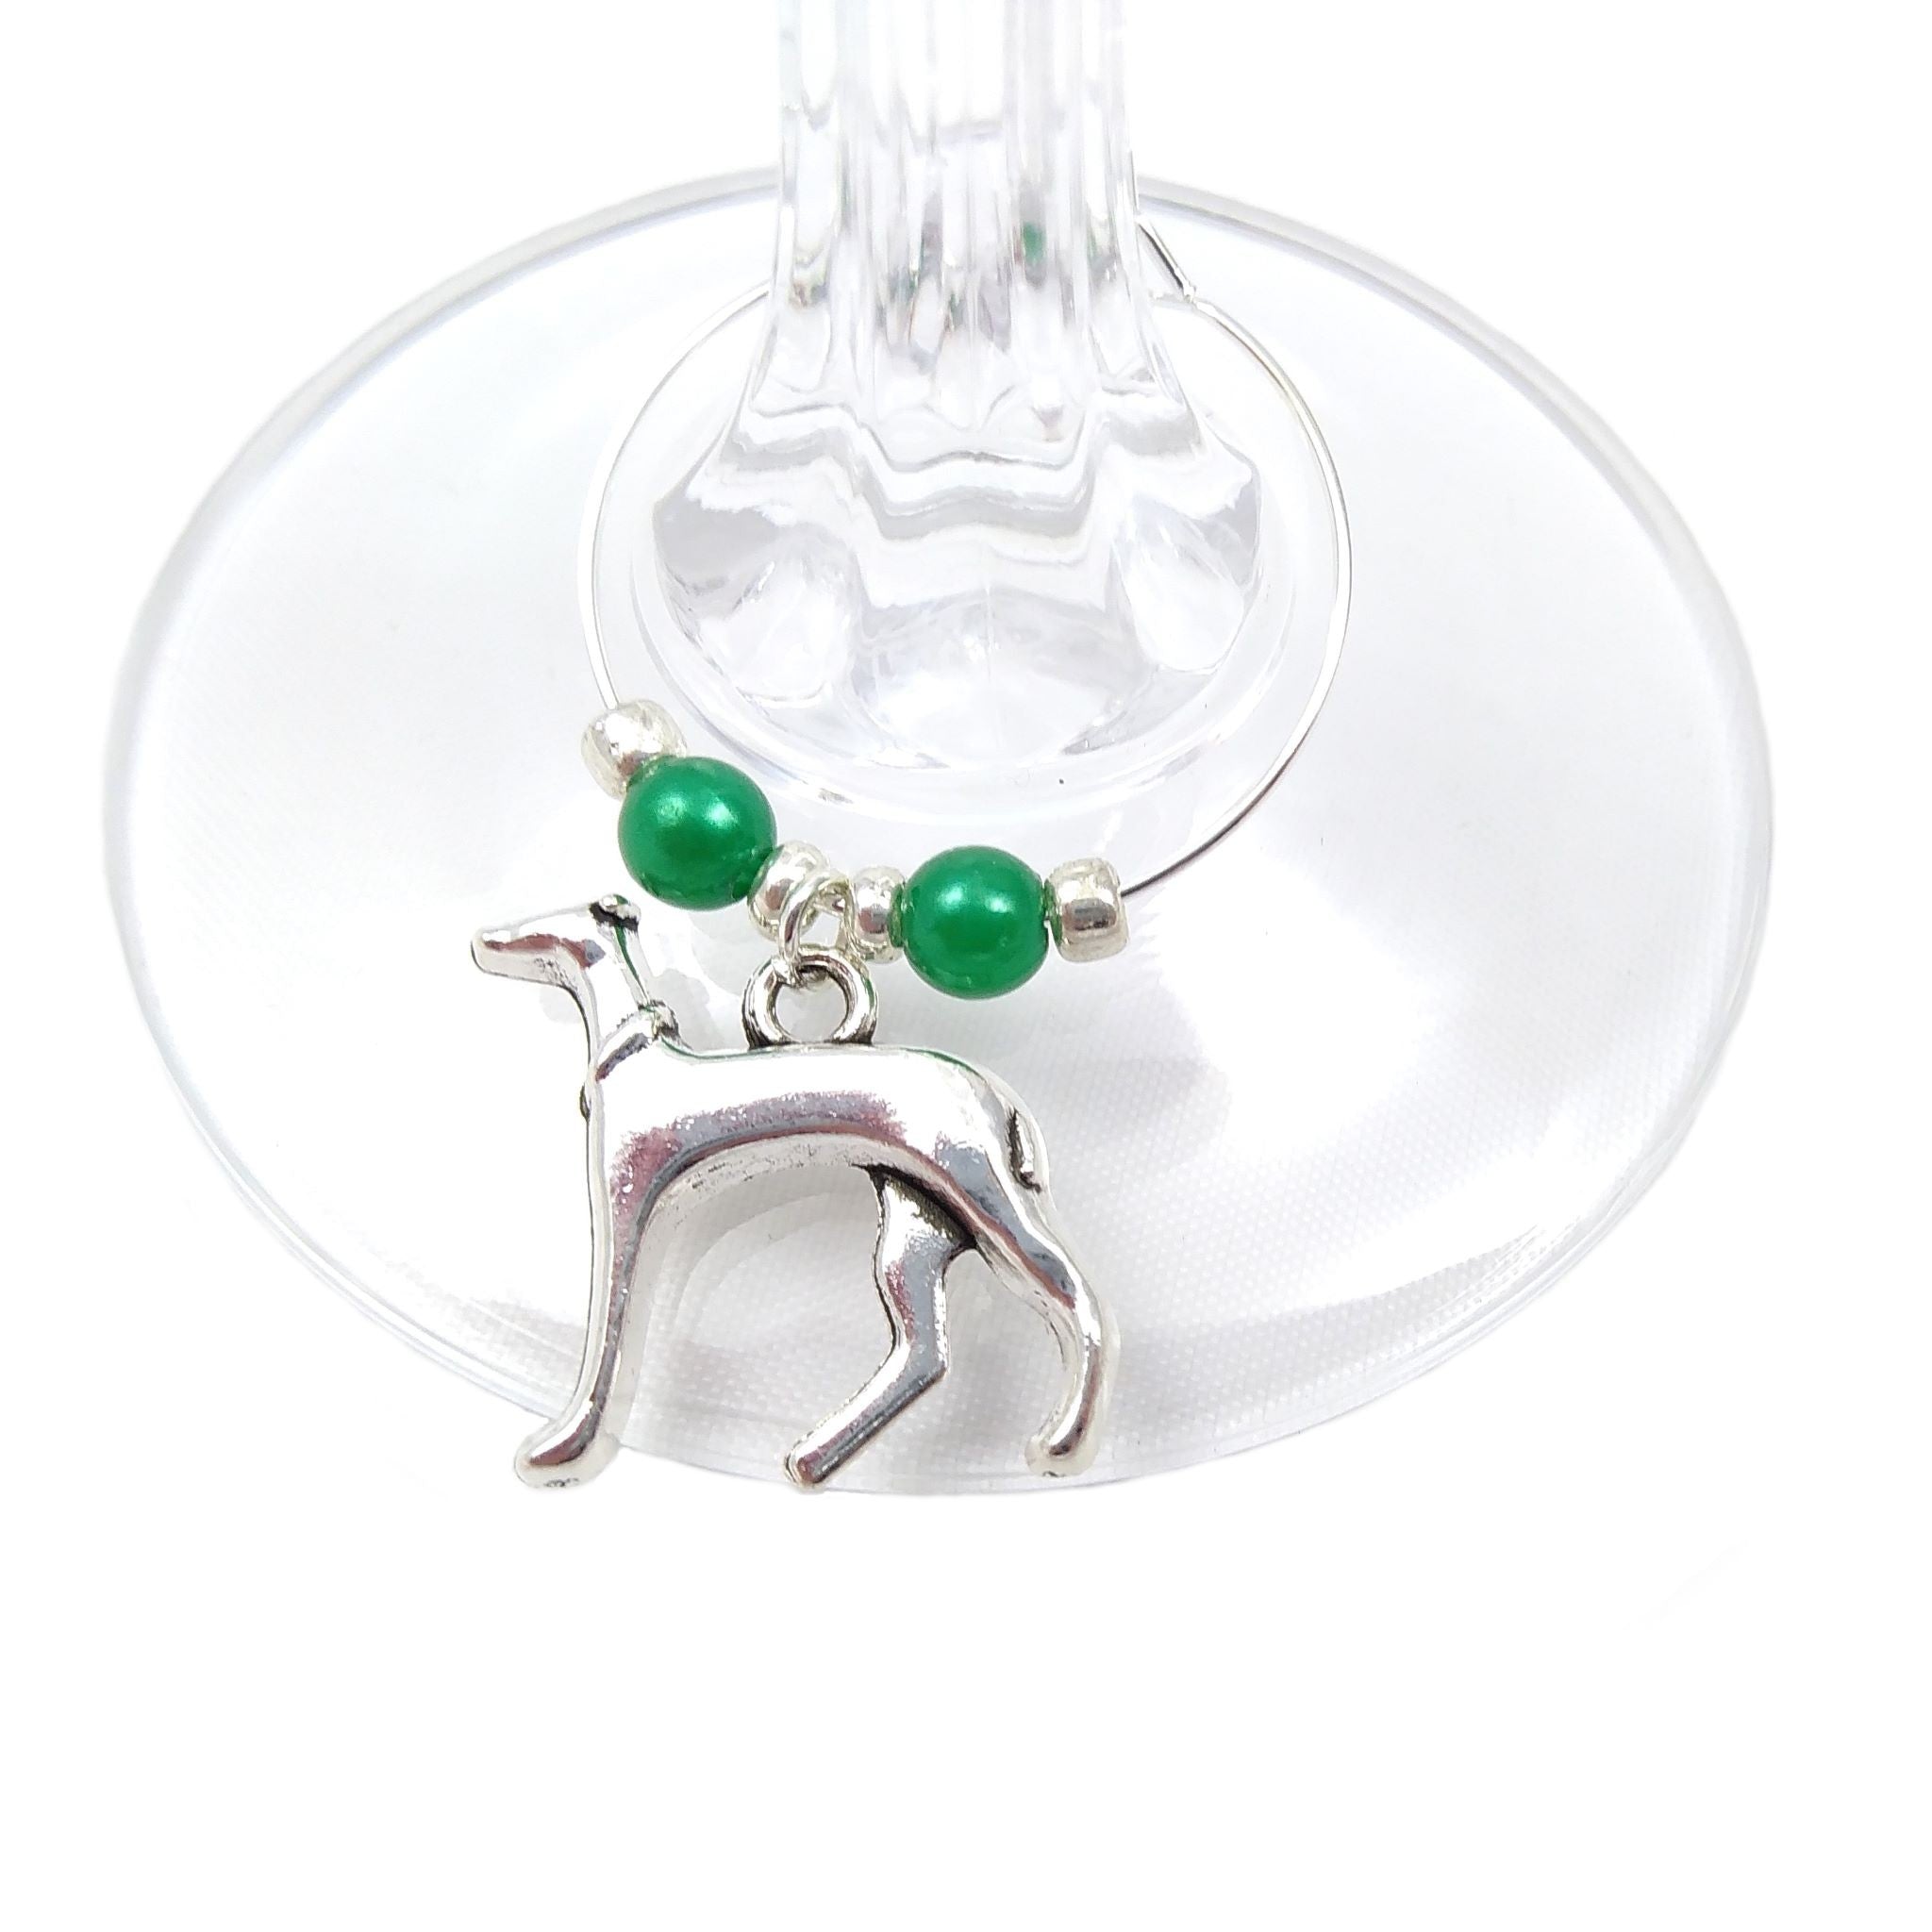 Whippet charm on wine glass